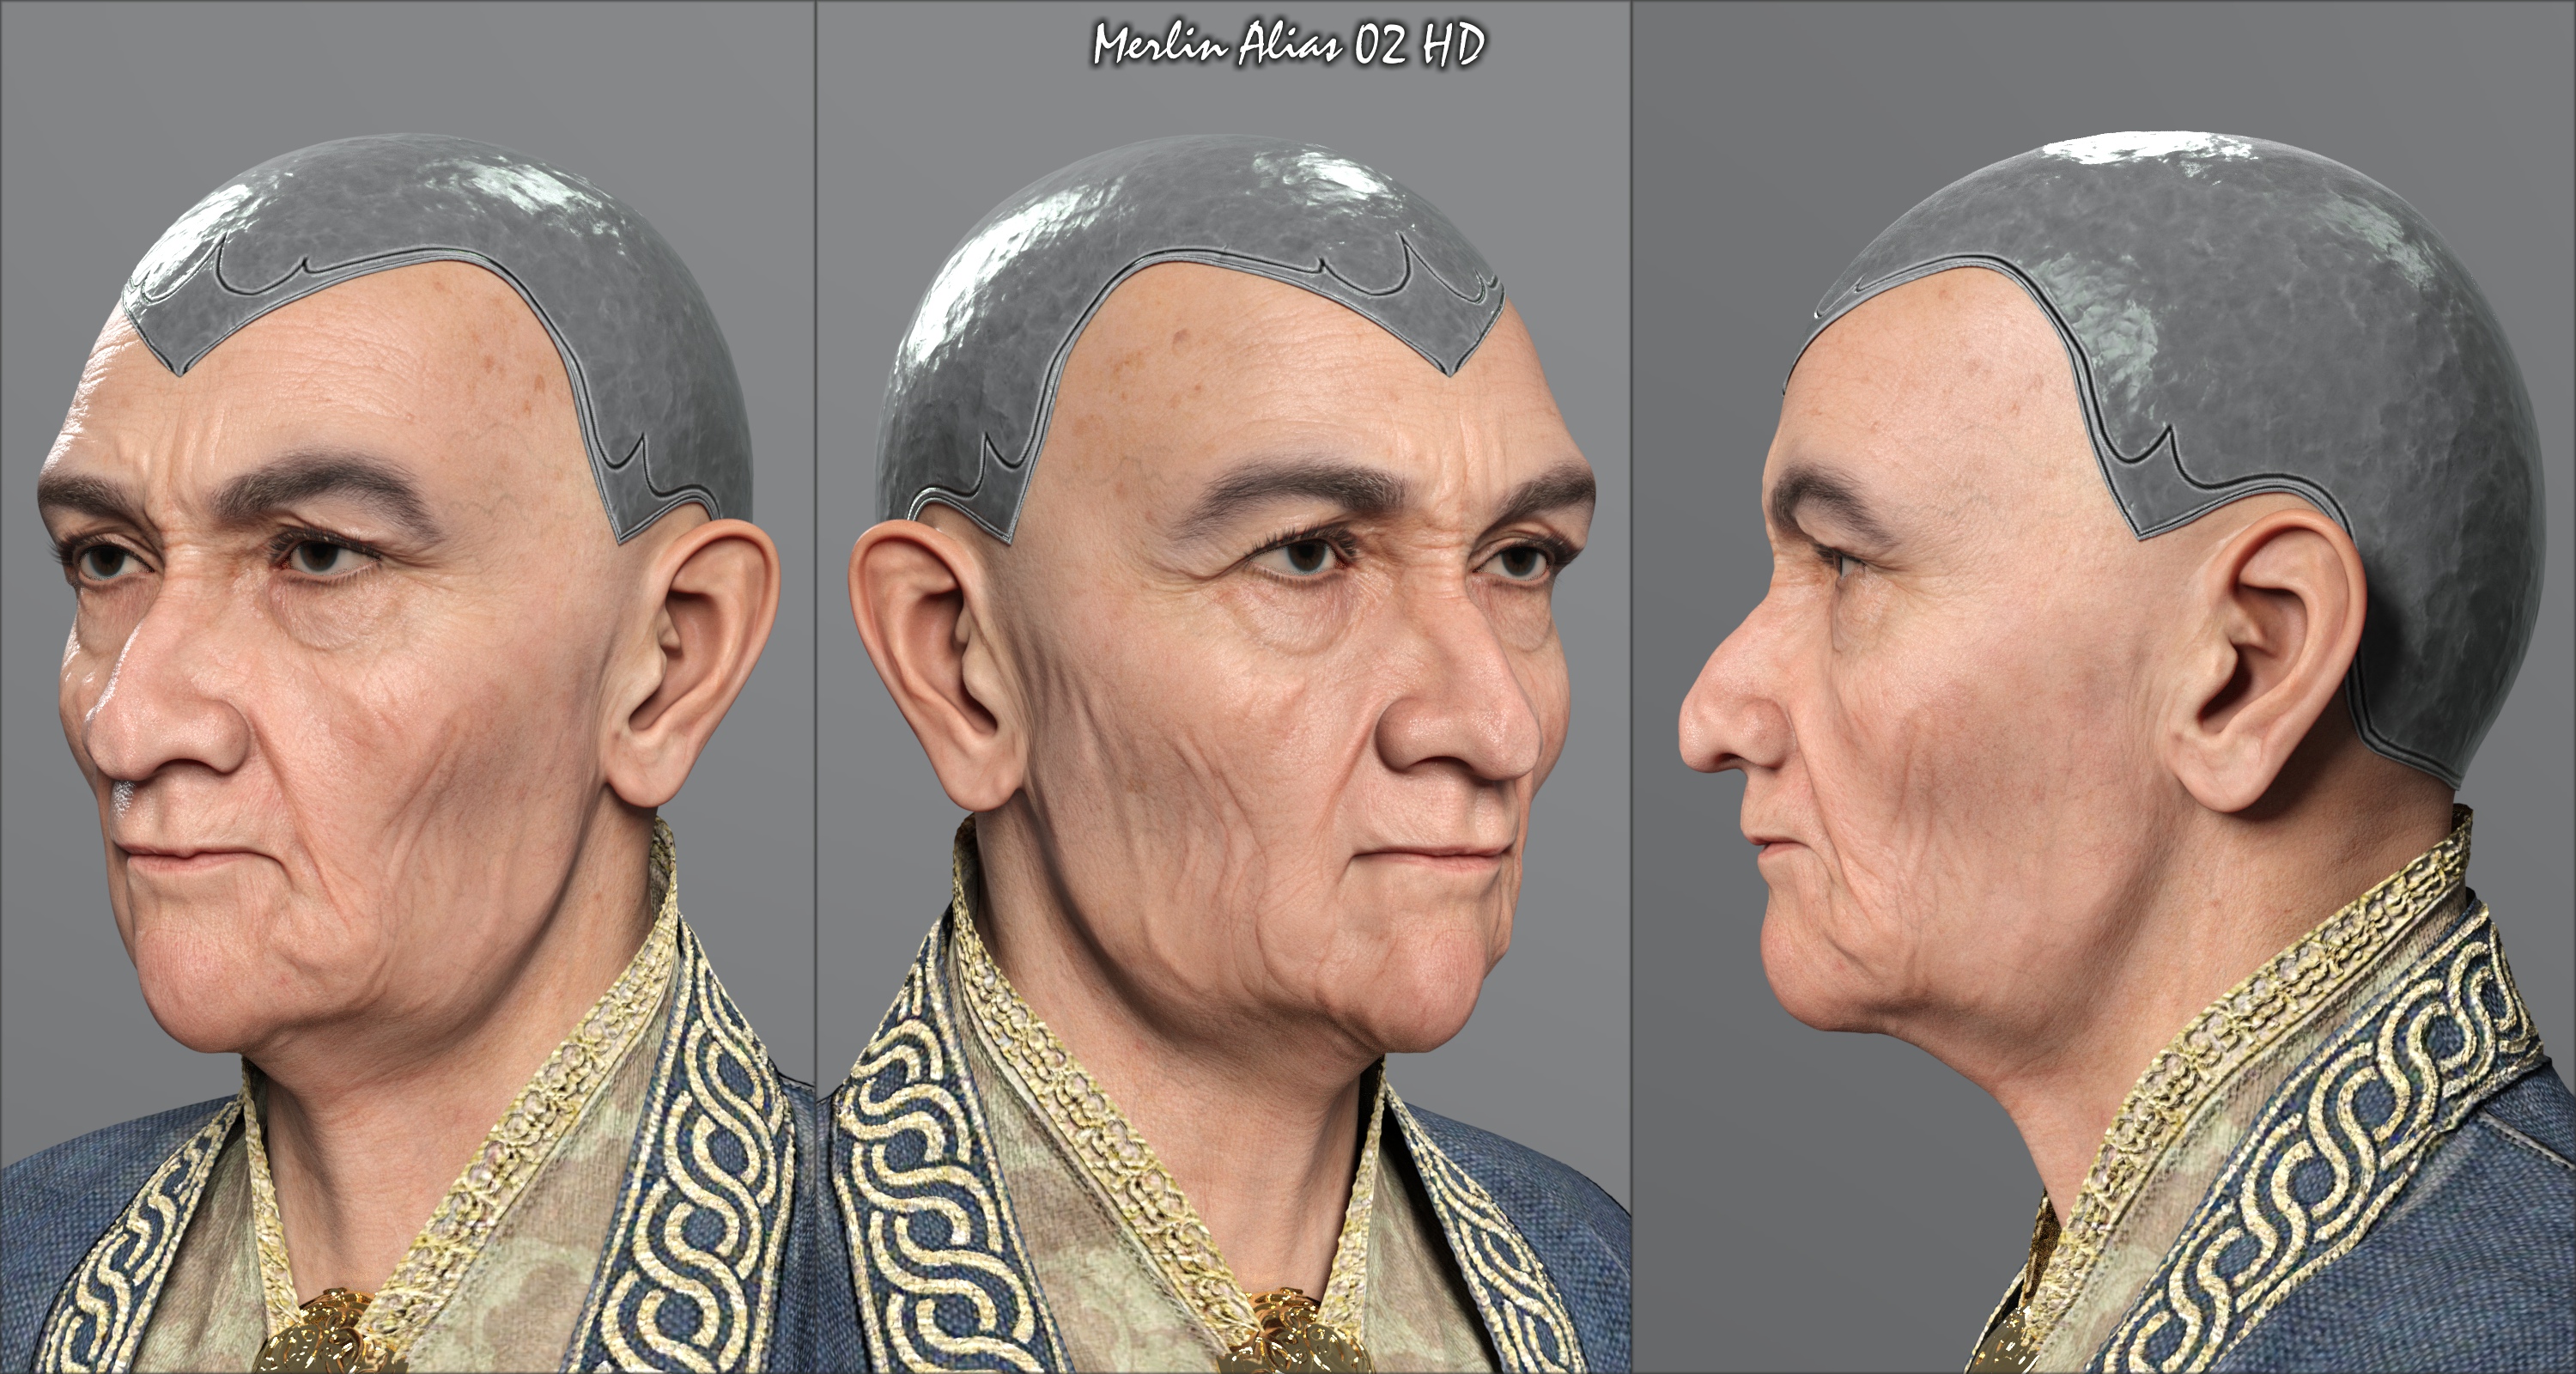 Merlin 4 Aliases for Merlin 8.1 by: 3D-GHDesignAe Ti, 3D Models by Daz 3D